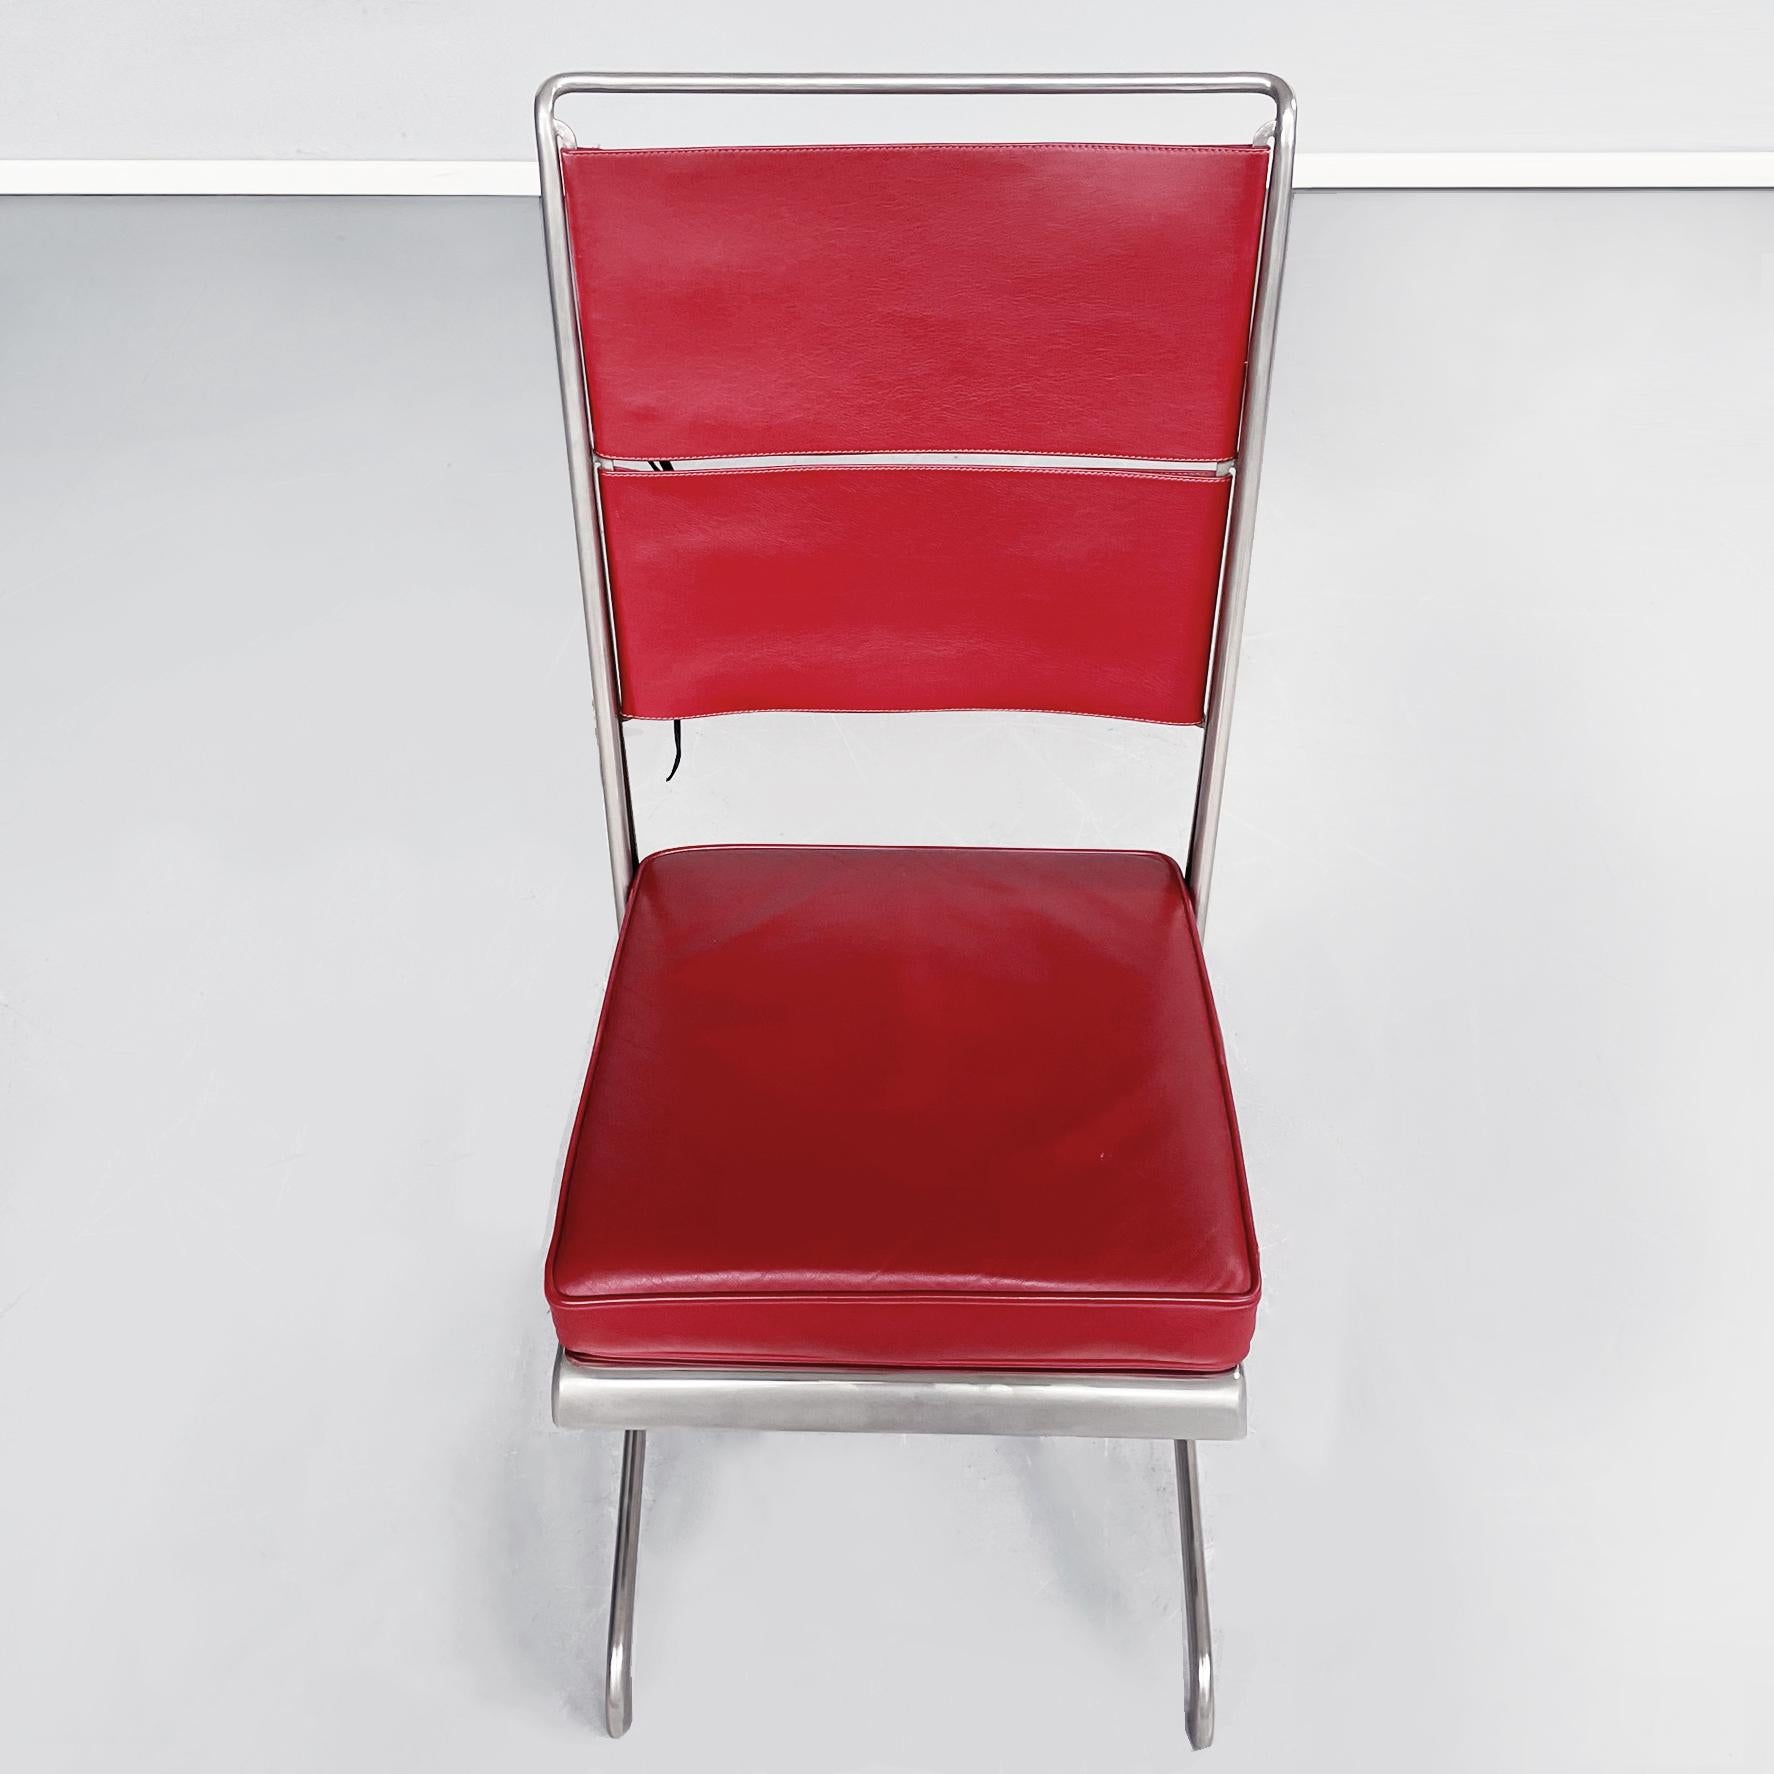 French Mid-Century Red Leather and Steel Chair by Jean Prouvé for Tecta, 1980s For Sale 1